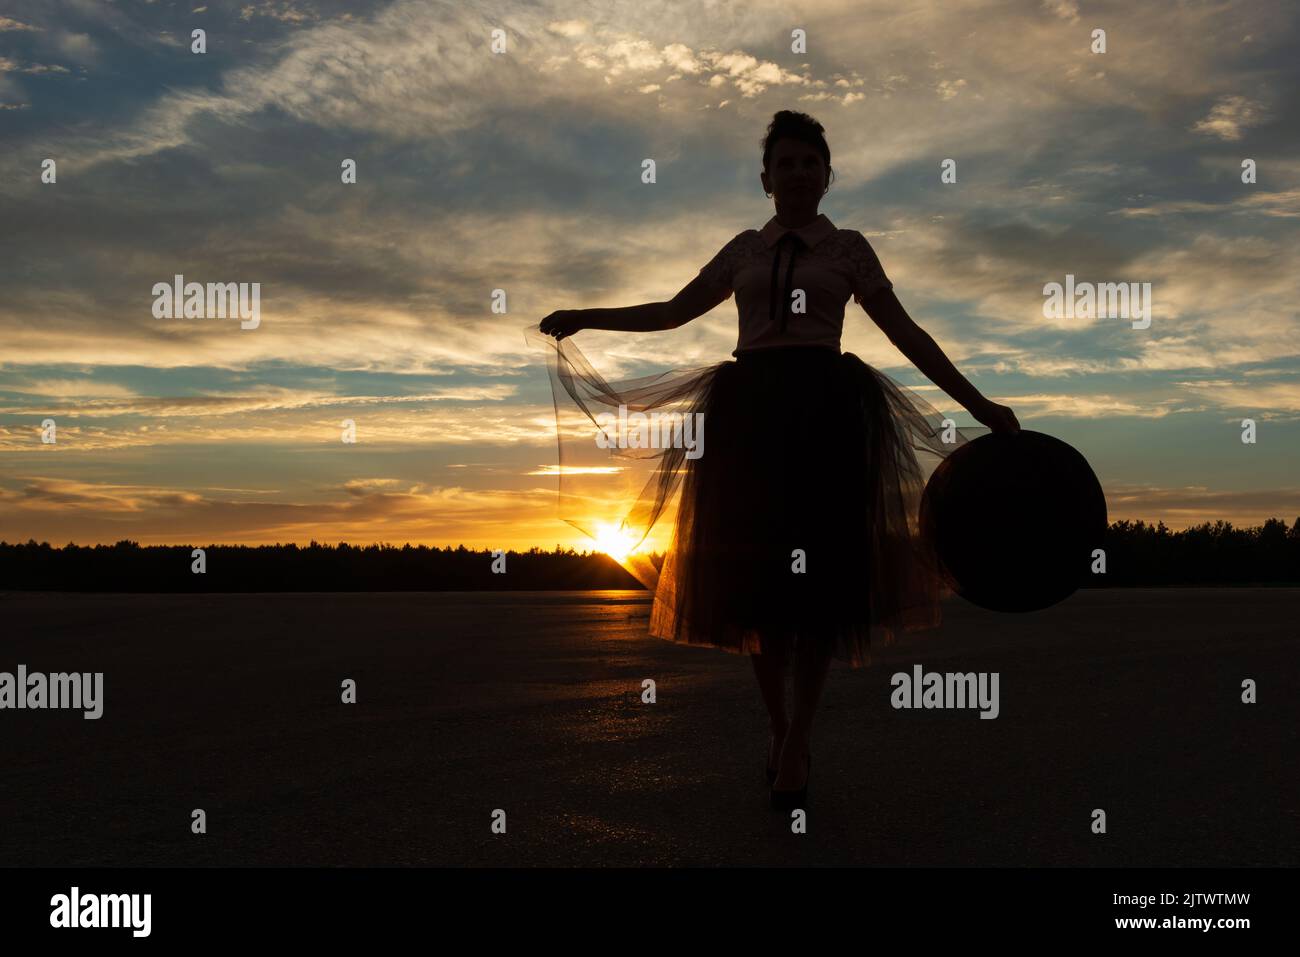 Woman holding edge of tutu skirt against forest silhouette and sunset cloudy sky backlit by sunbeams of setting sun with hat in hand,low angle view Stock Photo